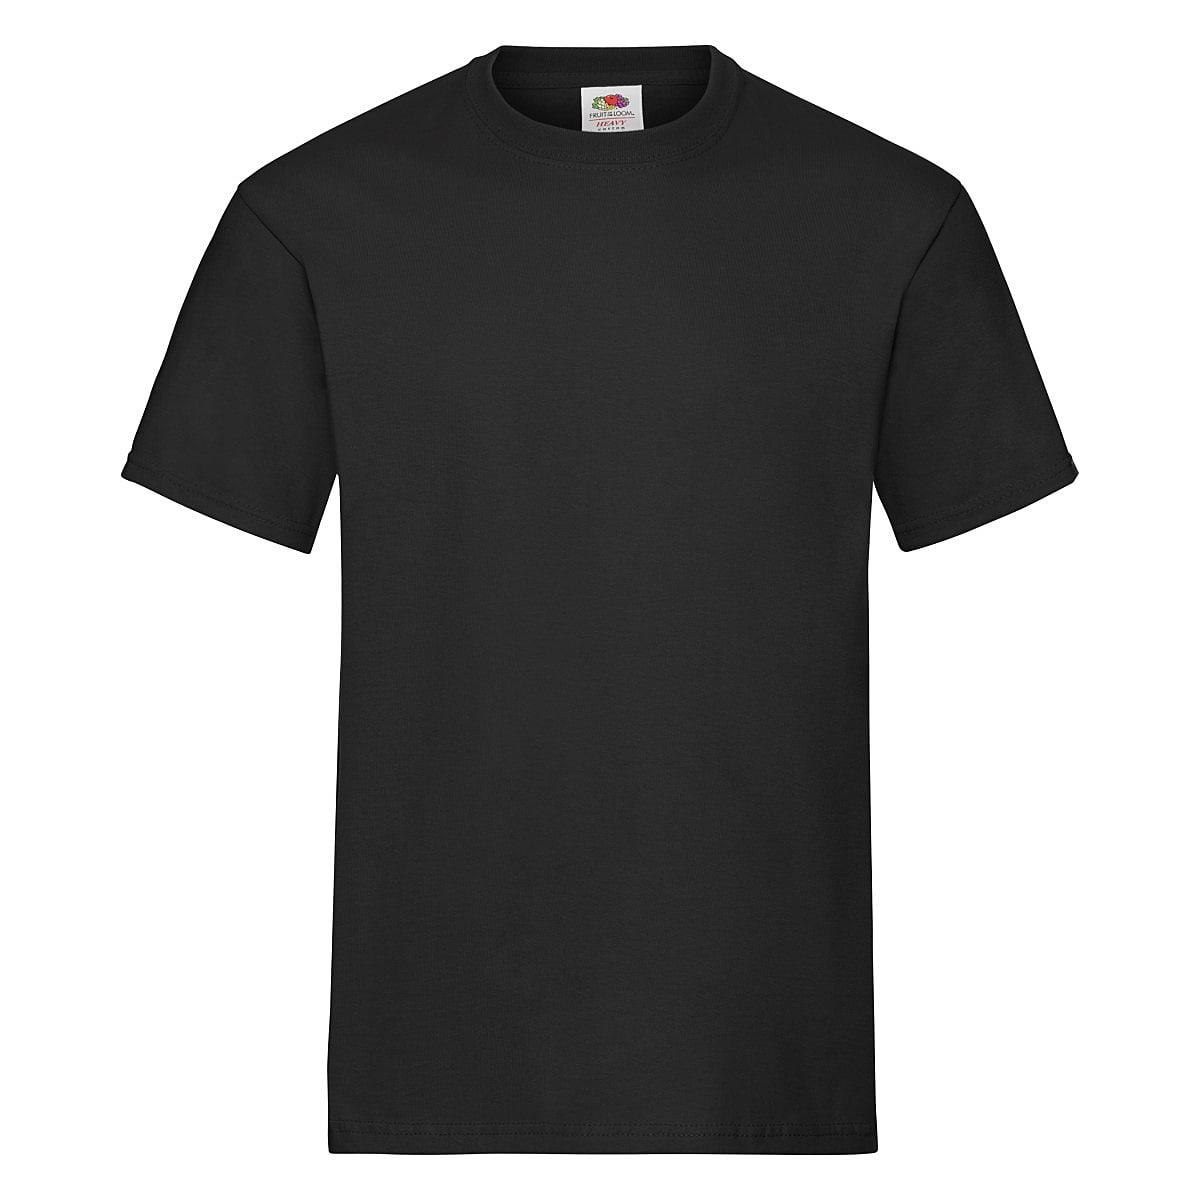 Fruit Of The Loom Heavy Cotton T-Shirt in Black (Product Code: 61212)